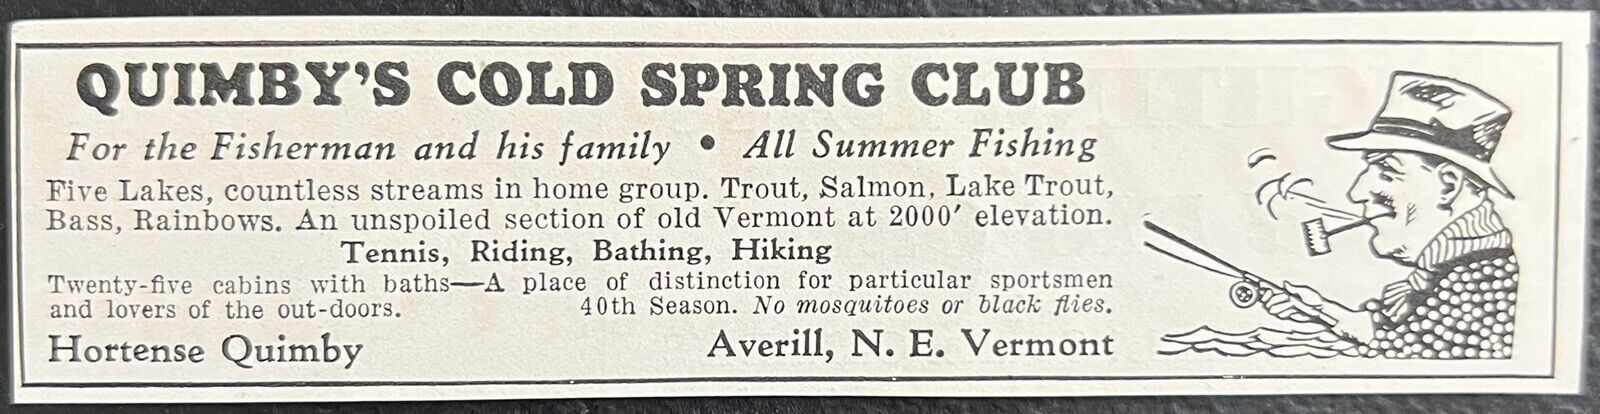 Averill VT Quimby’s Cold Spring Club 1934 Advertising Print Advertisement